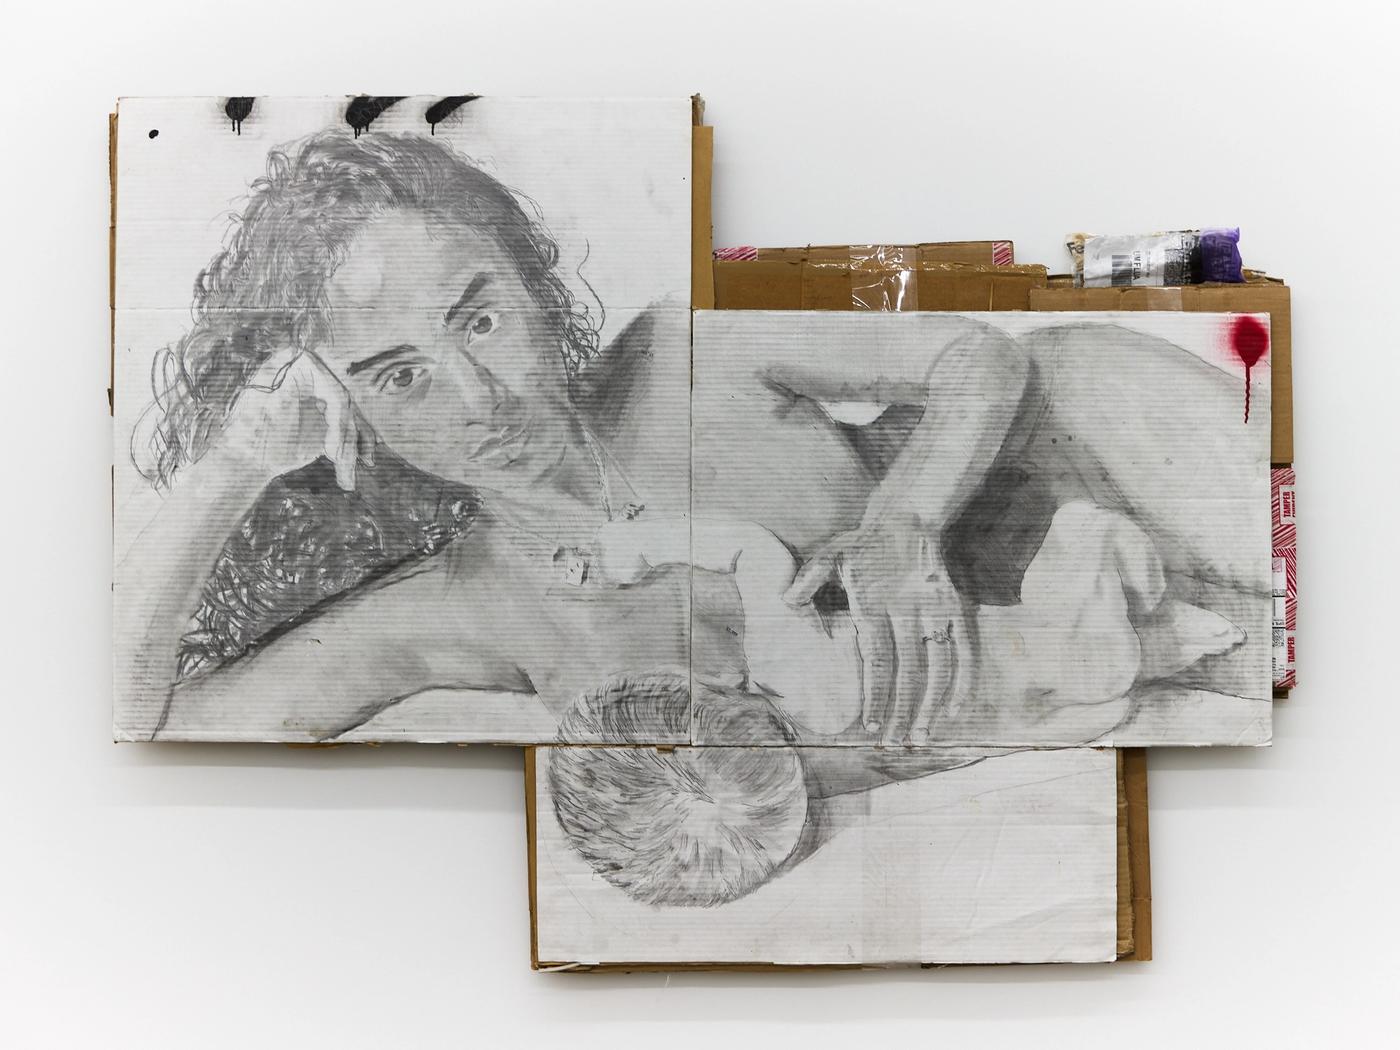 Image of Vashtie, 2021: Graphite and charcoal on found cardboard